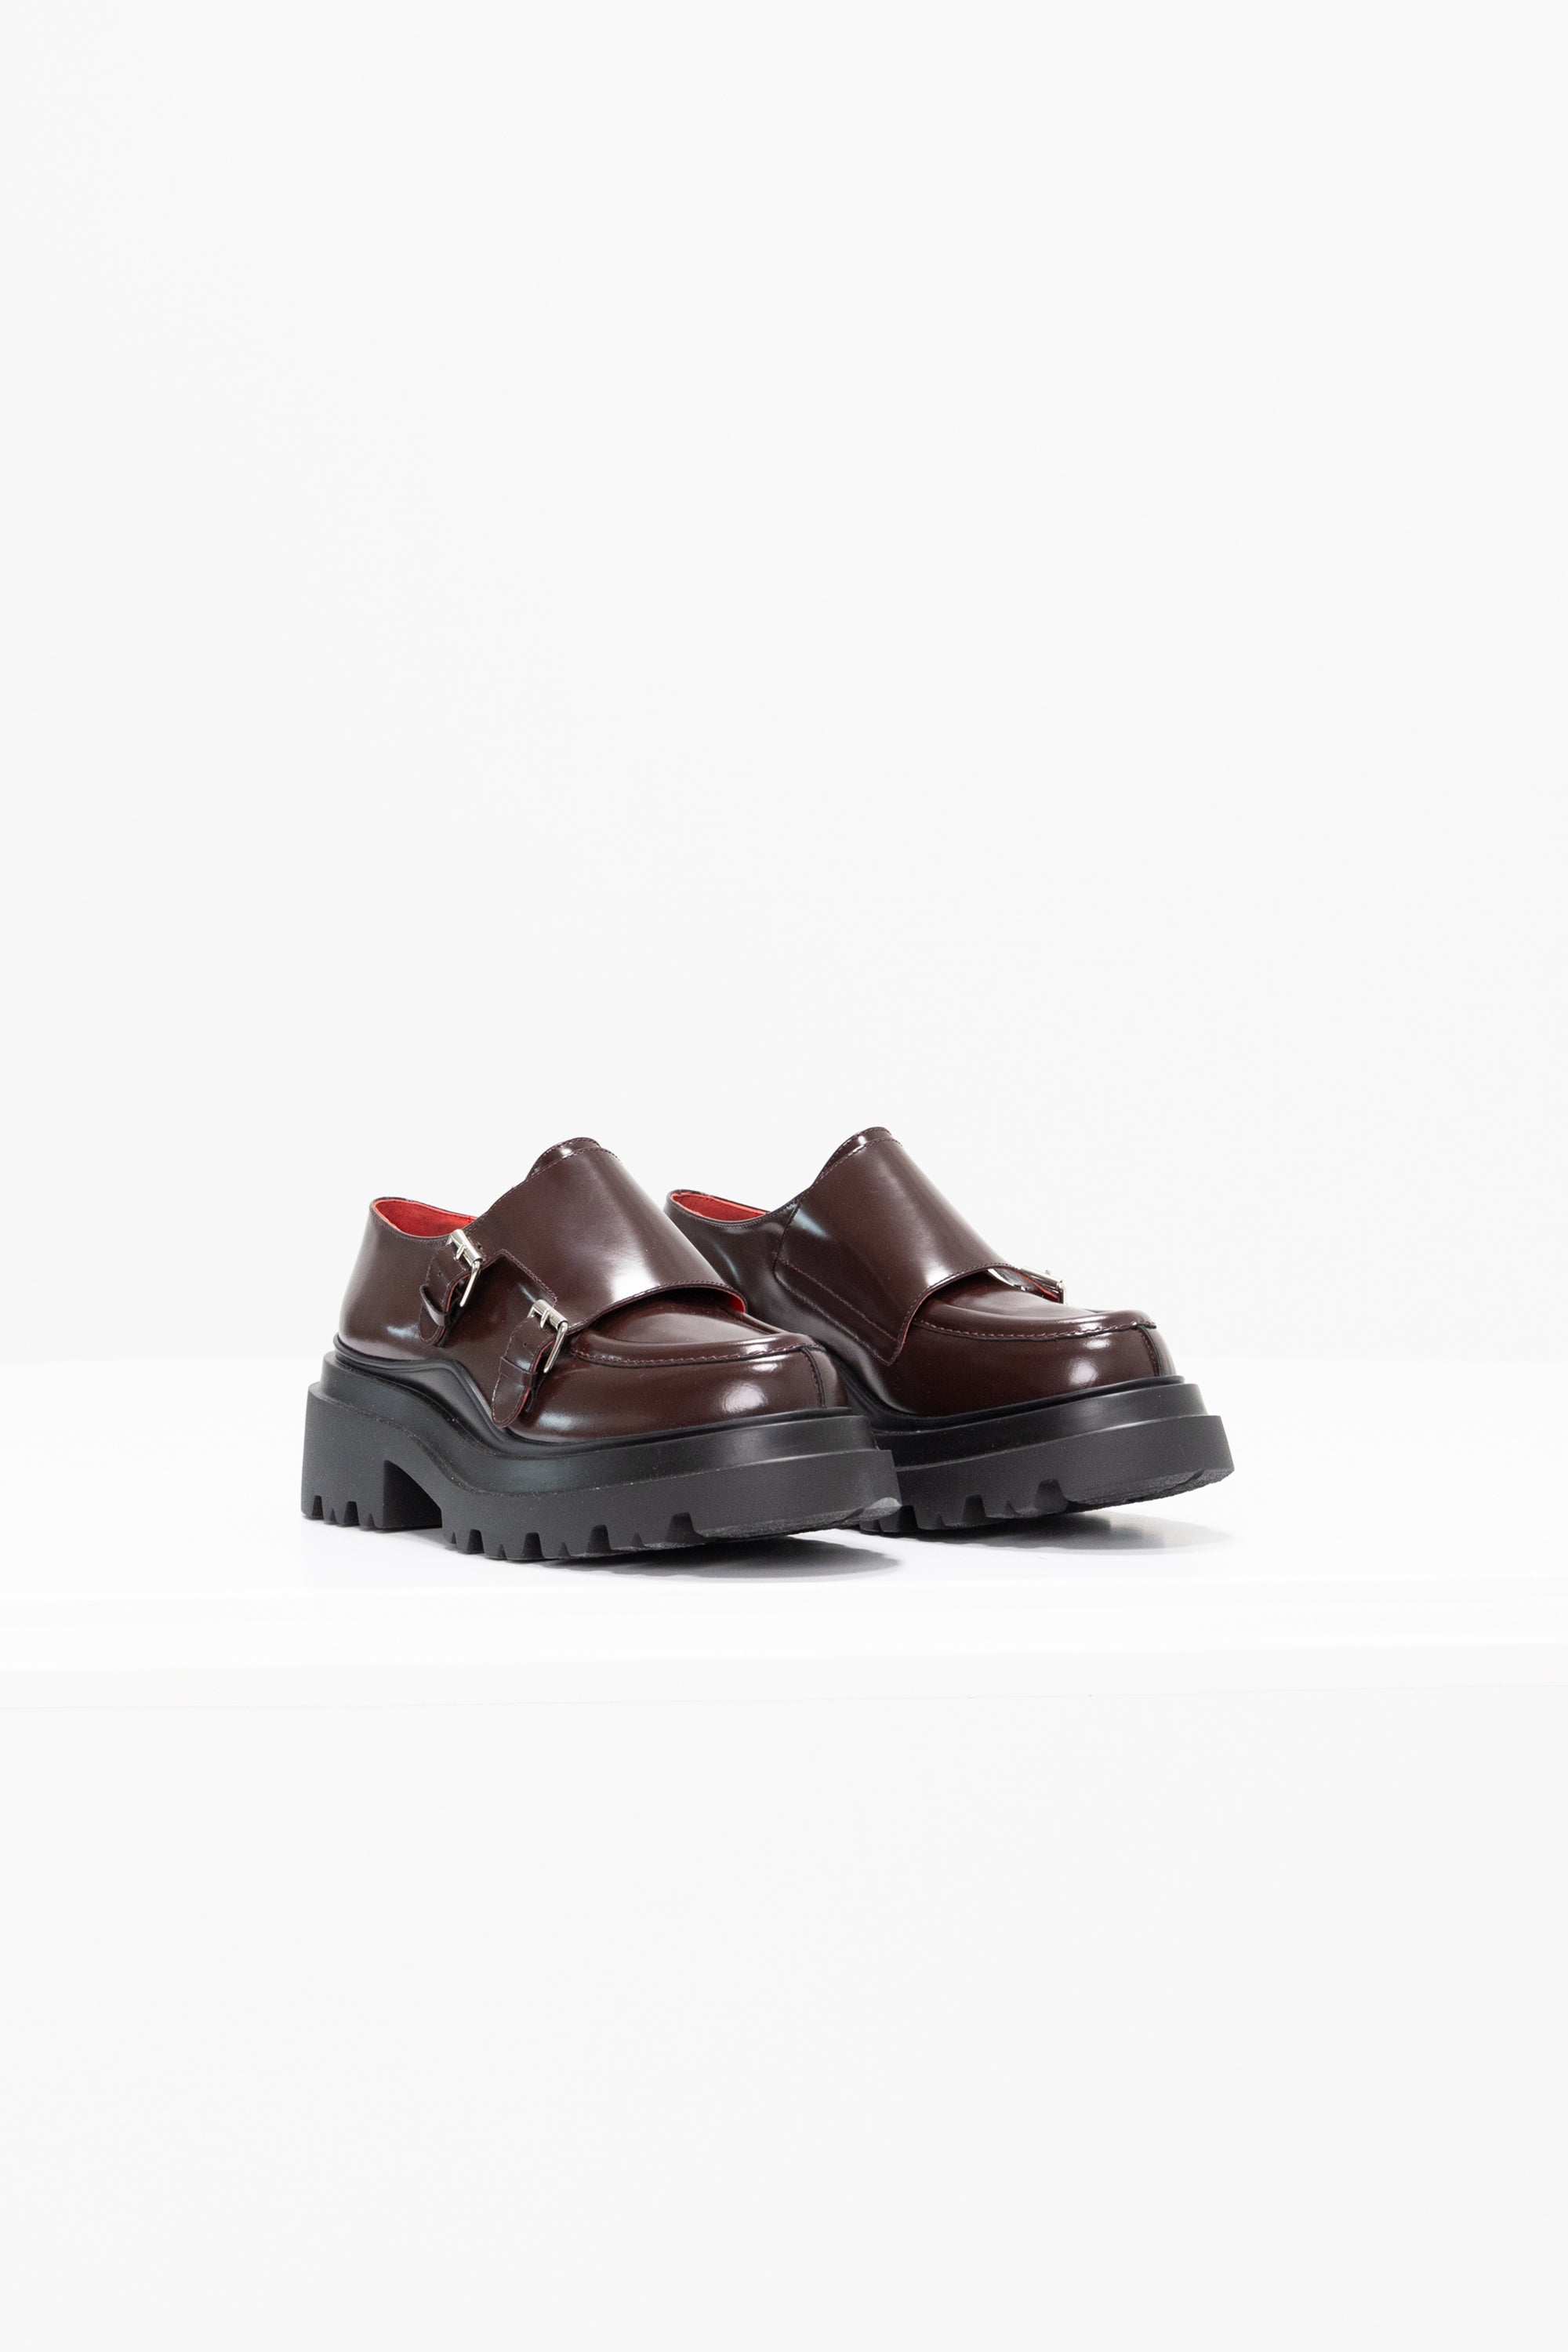 PLAN C - Loafer with Buckles, Oxblood